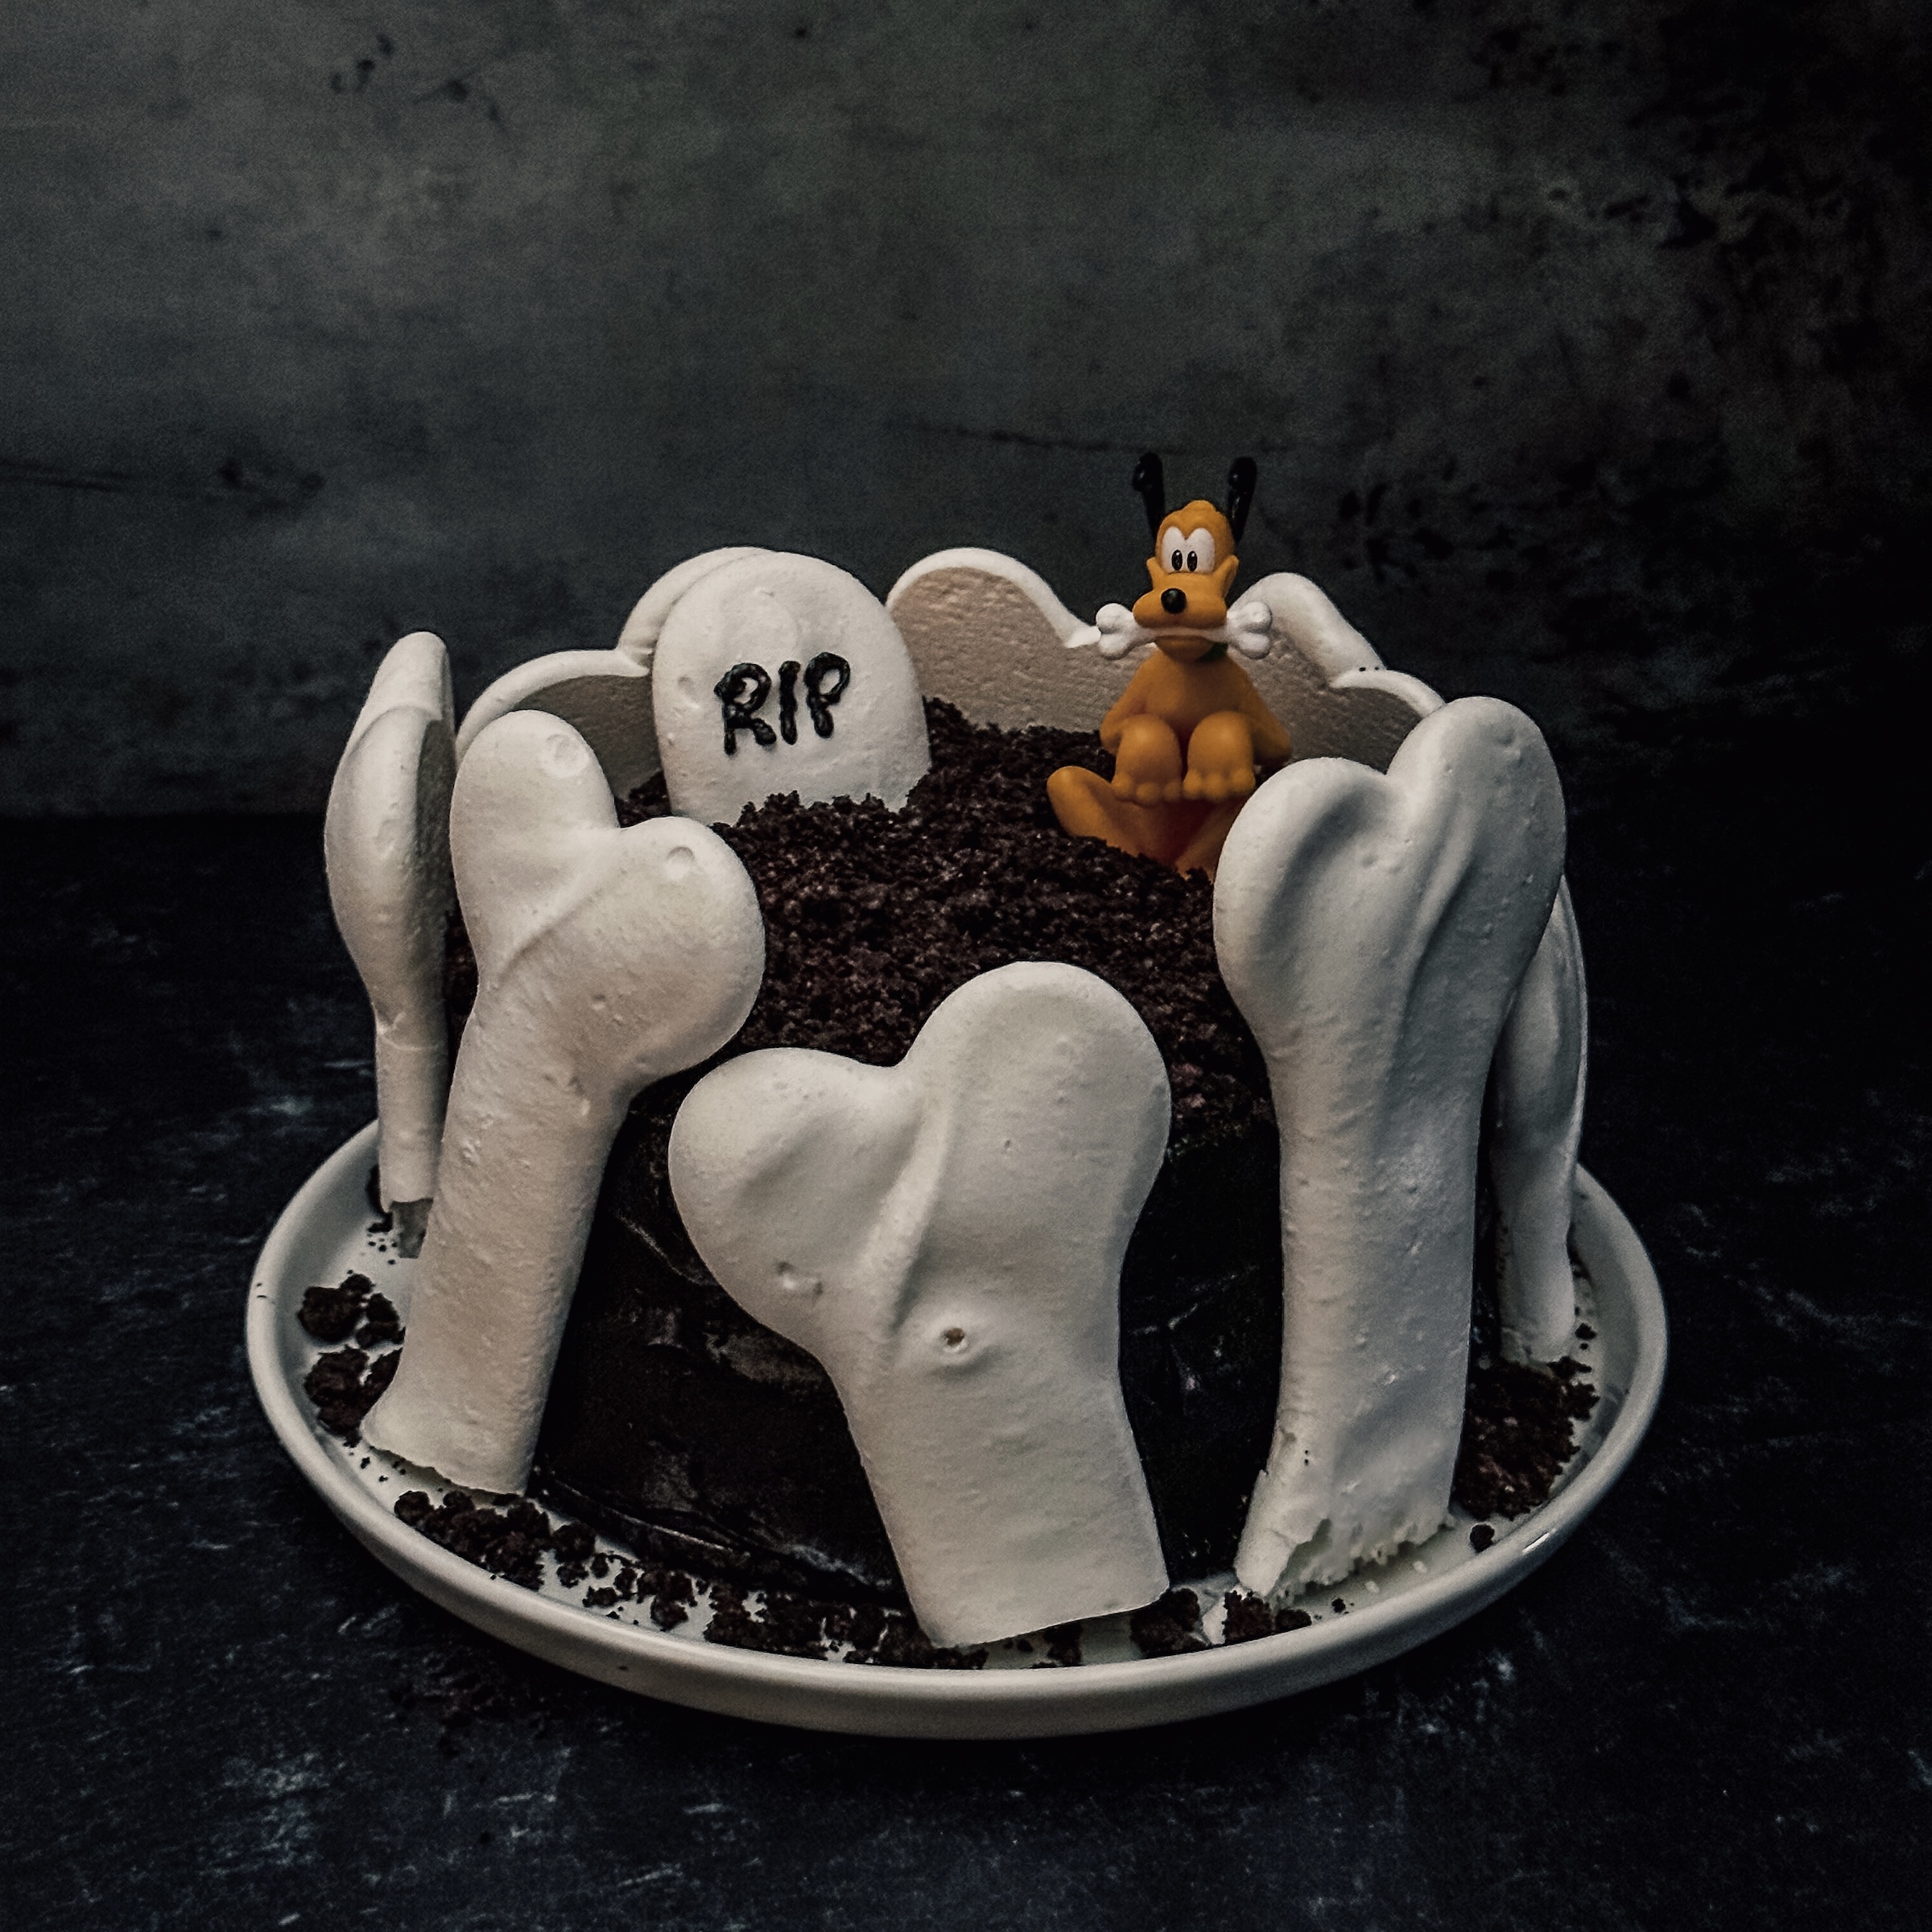 Pluto's Graveyard Cake (Black and white marble cake with black cocoa frosting, oreo crumbs, and meringue bones)